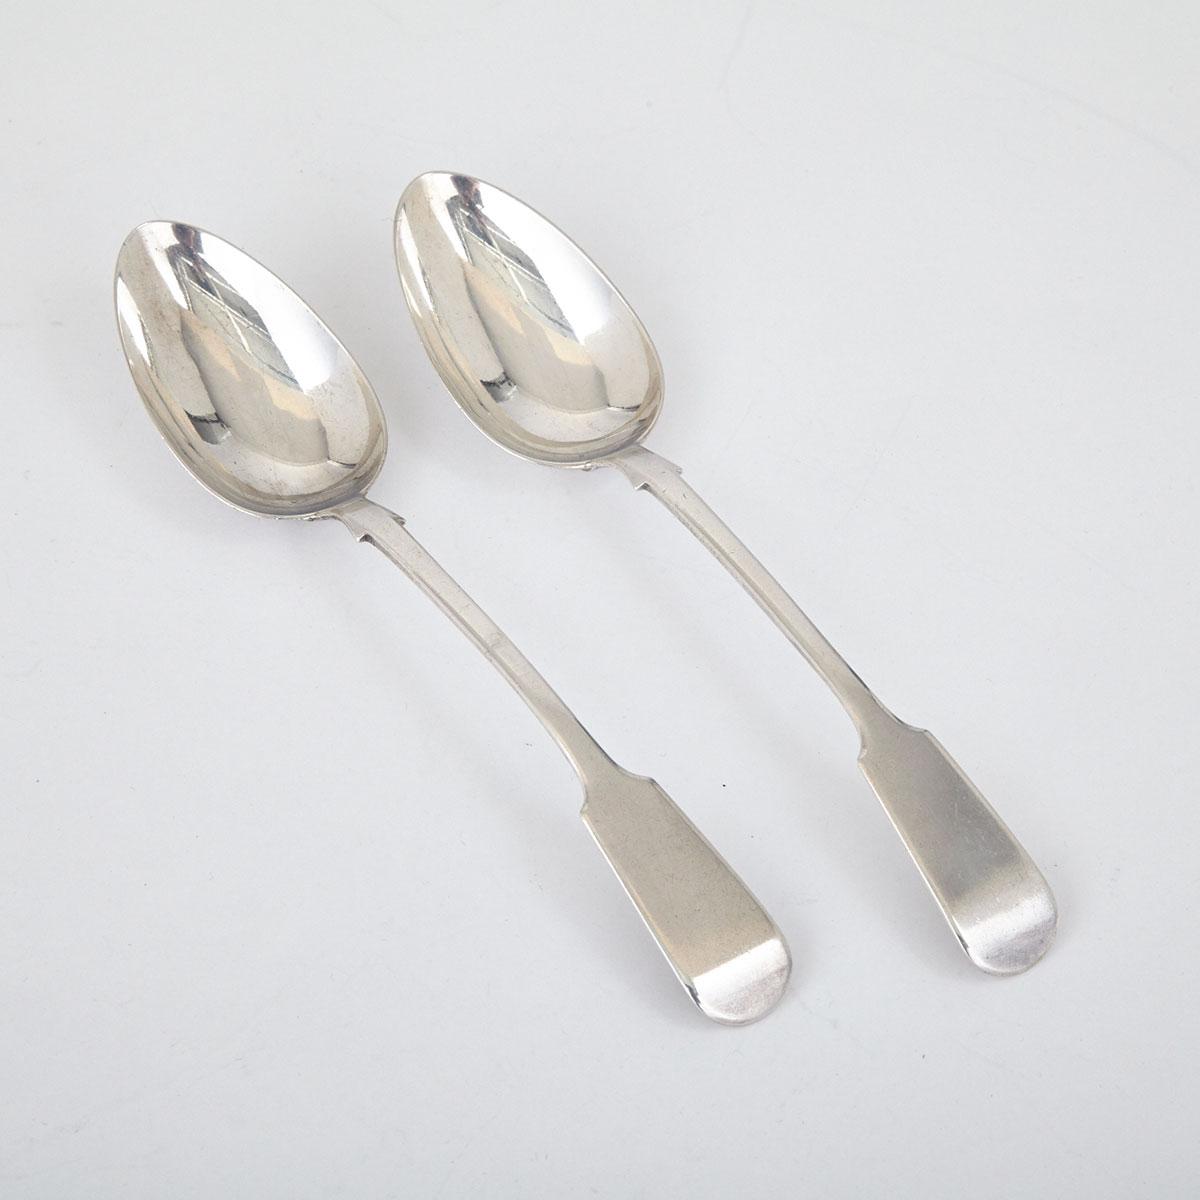 Canadian Silver Fiddle Pattern Table Spoon, Robert Hendery, Montreal, Que., mid-19th century and a Similar Spoon, maker’s mark R.H, London, 1830